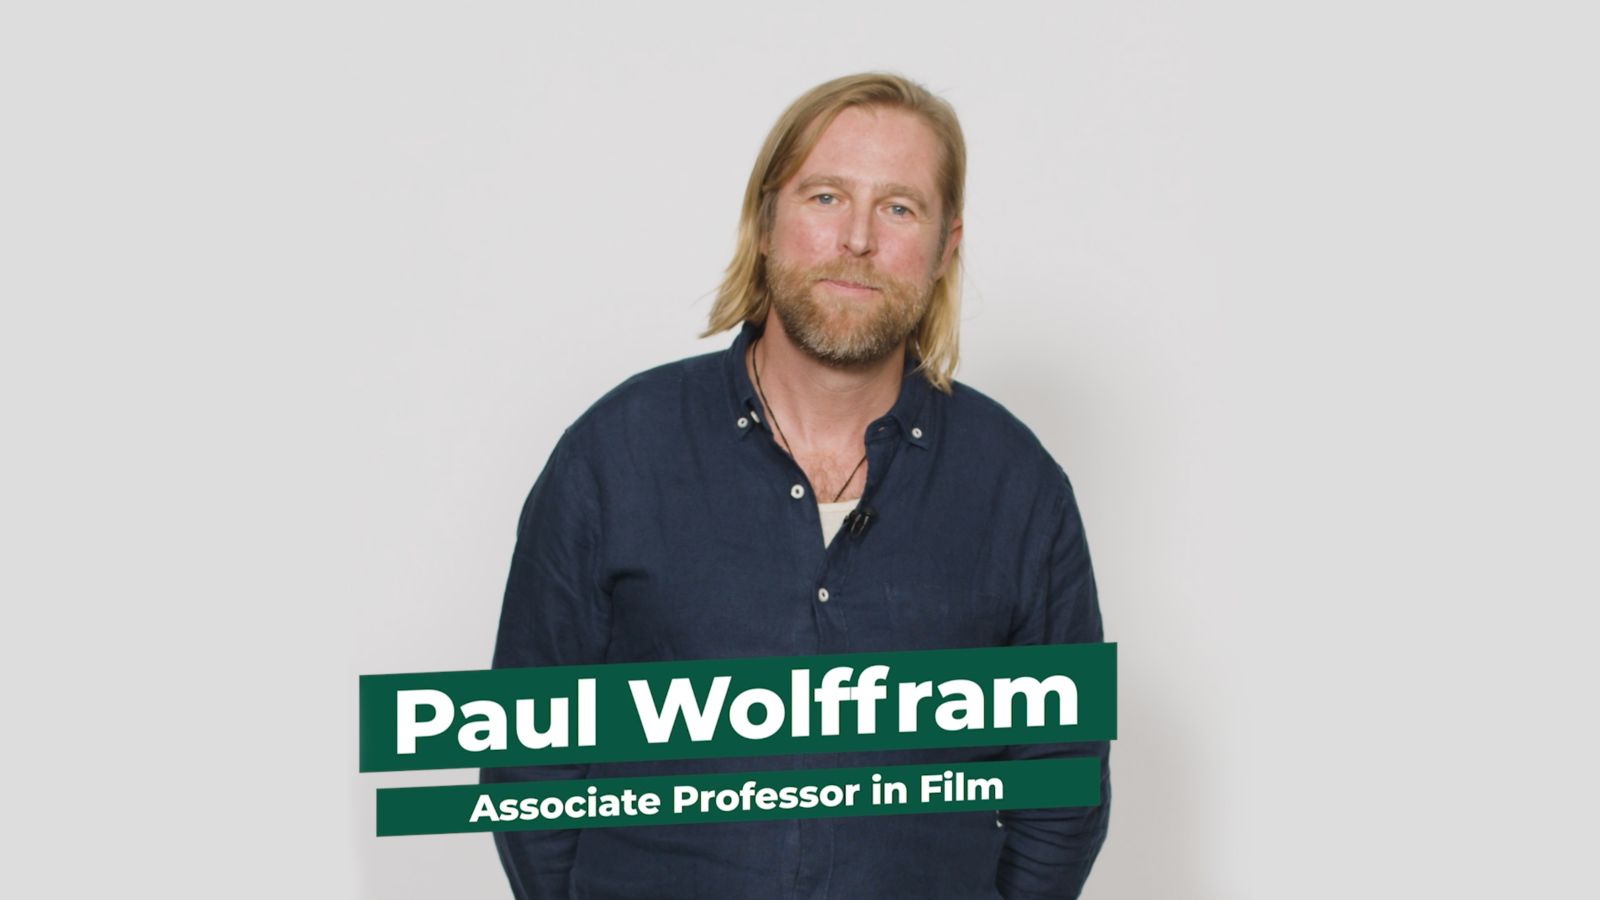 Associate Professor Paul Wolffram stands facing the camera against a white background